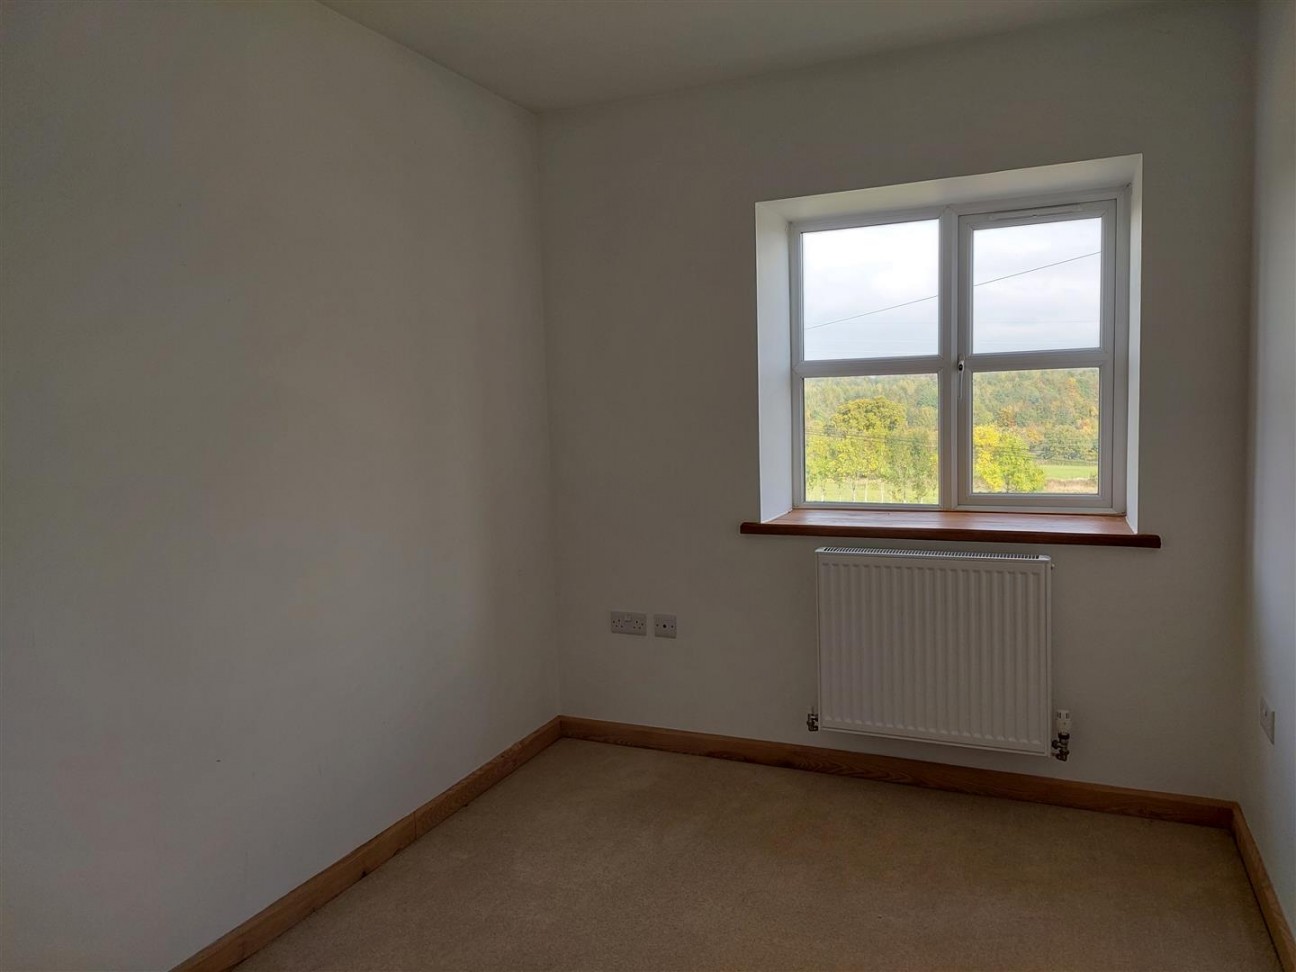 Nelson Court, Morse Road, Drybrook - shared ownership